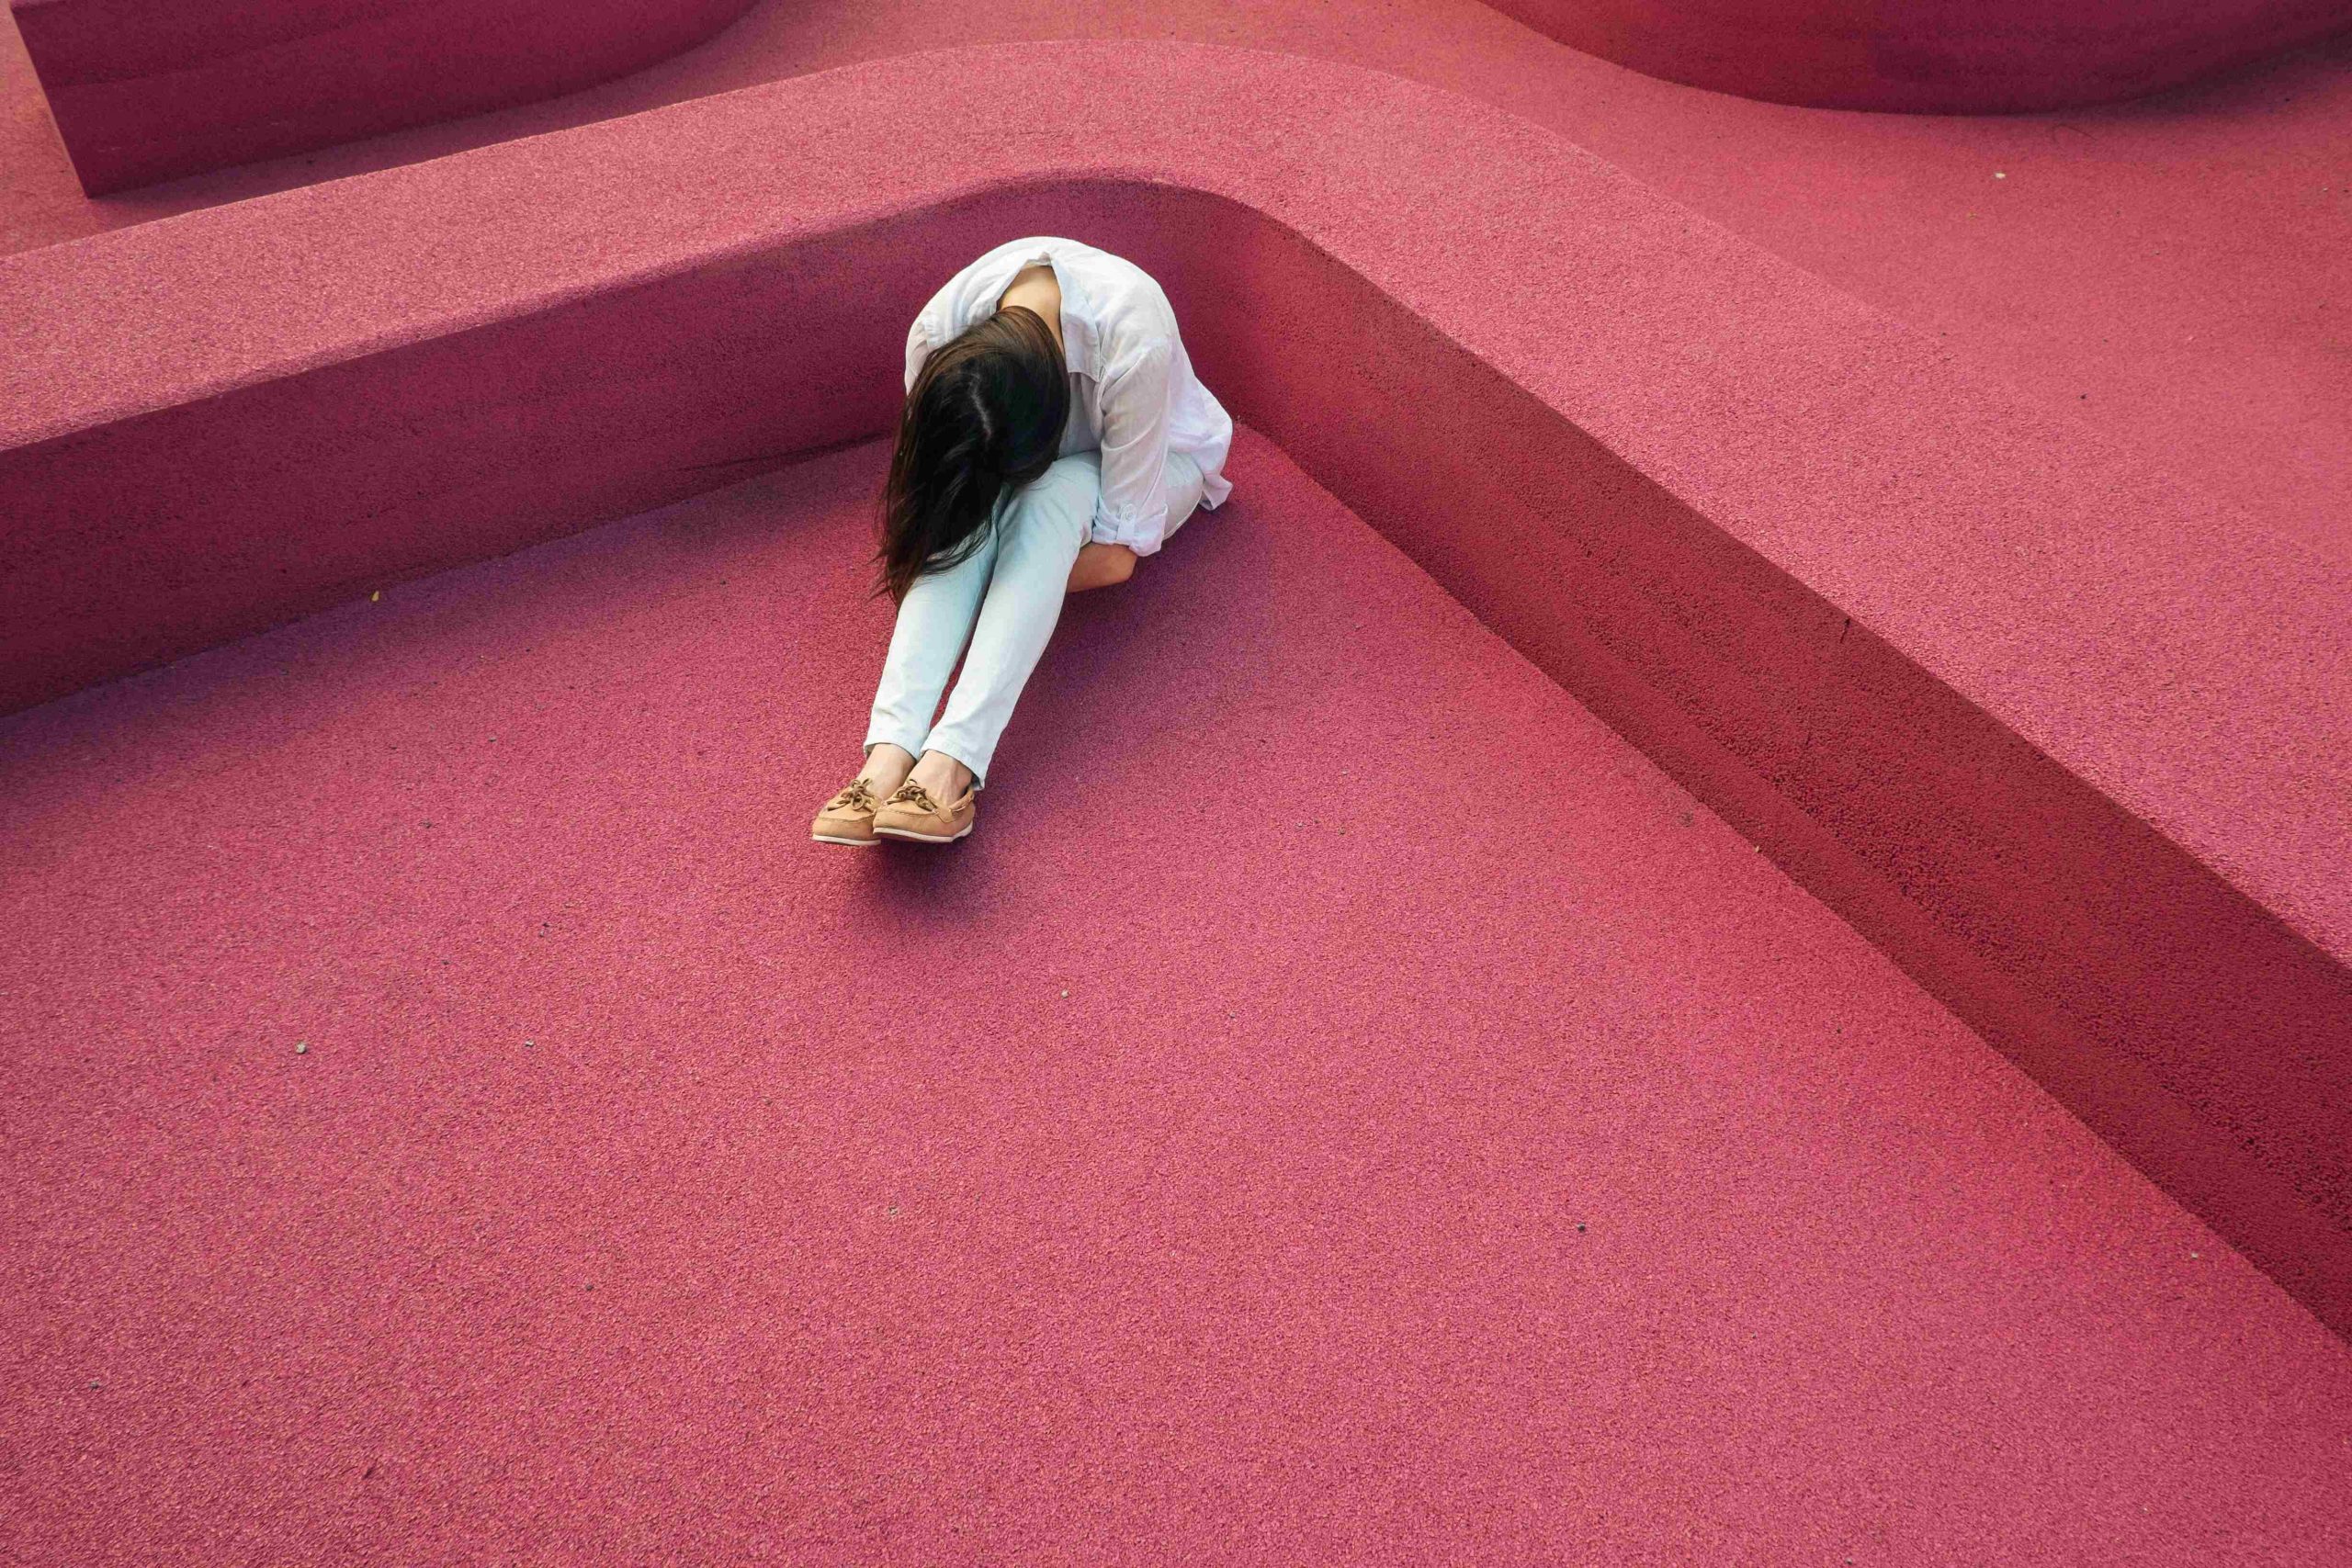 A woman wearing all-white hunched over into her knees sitting on a pink floor.